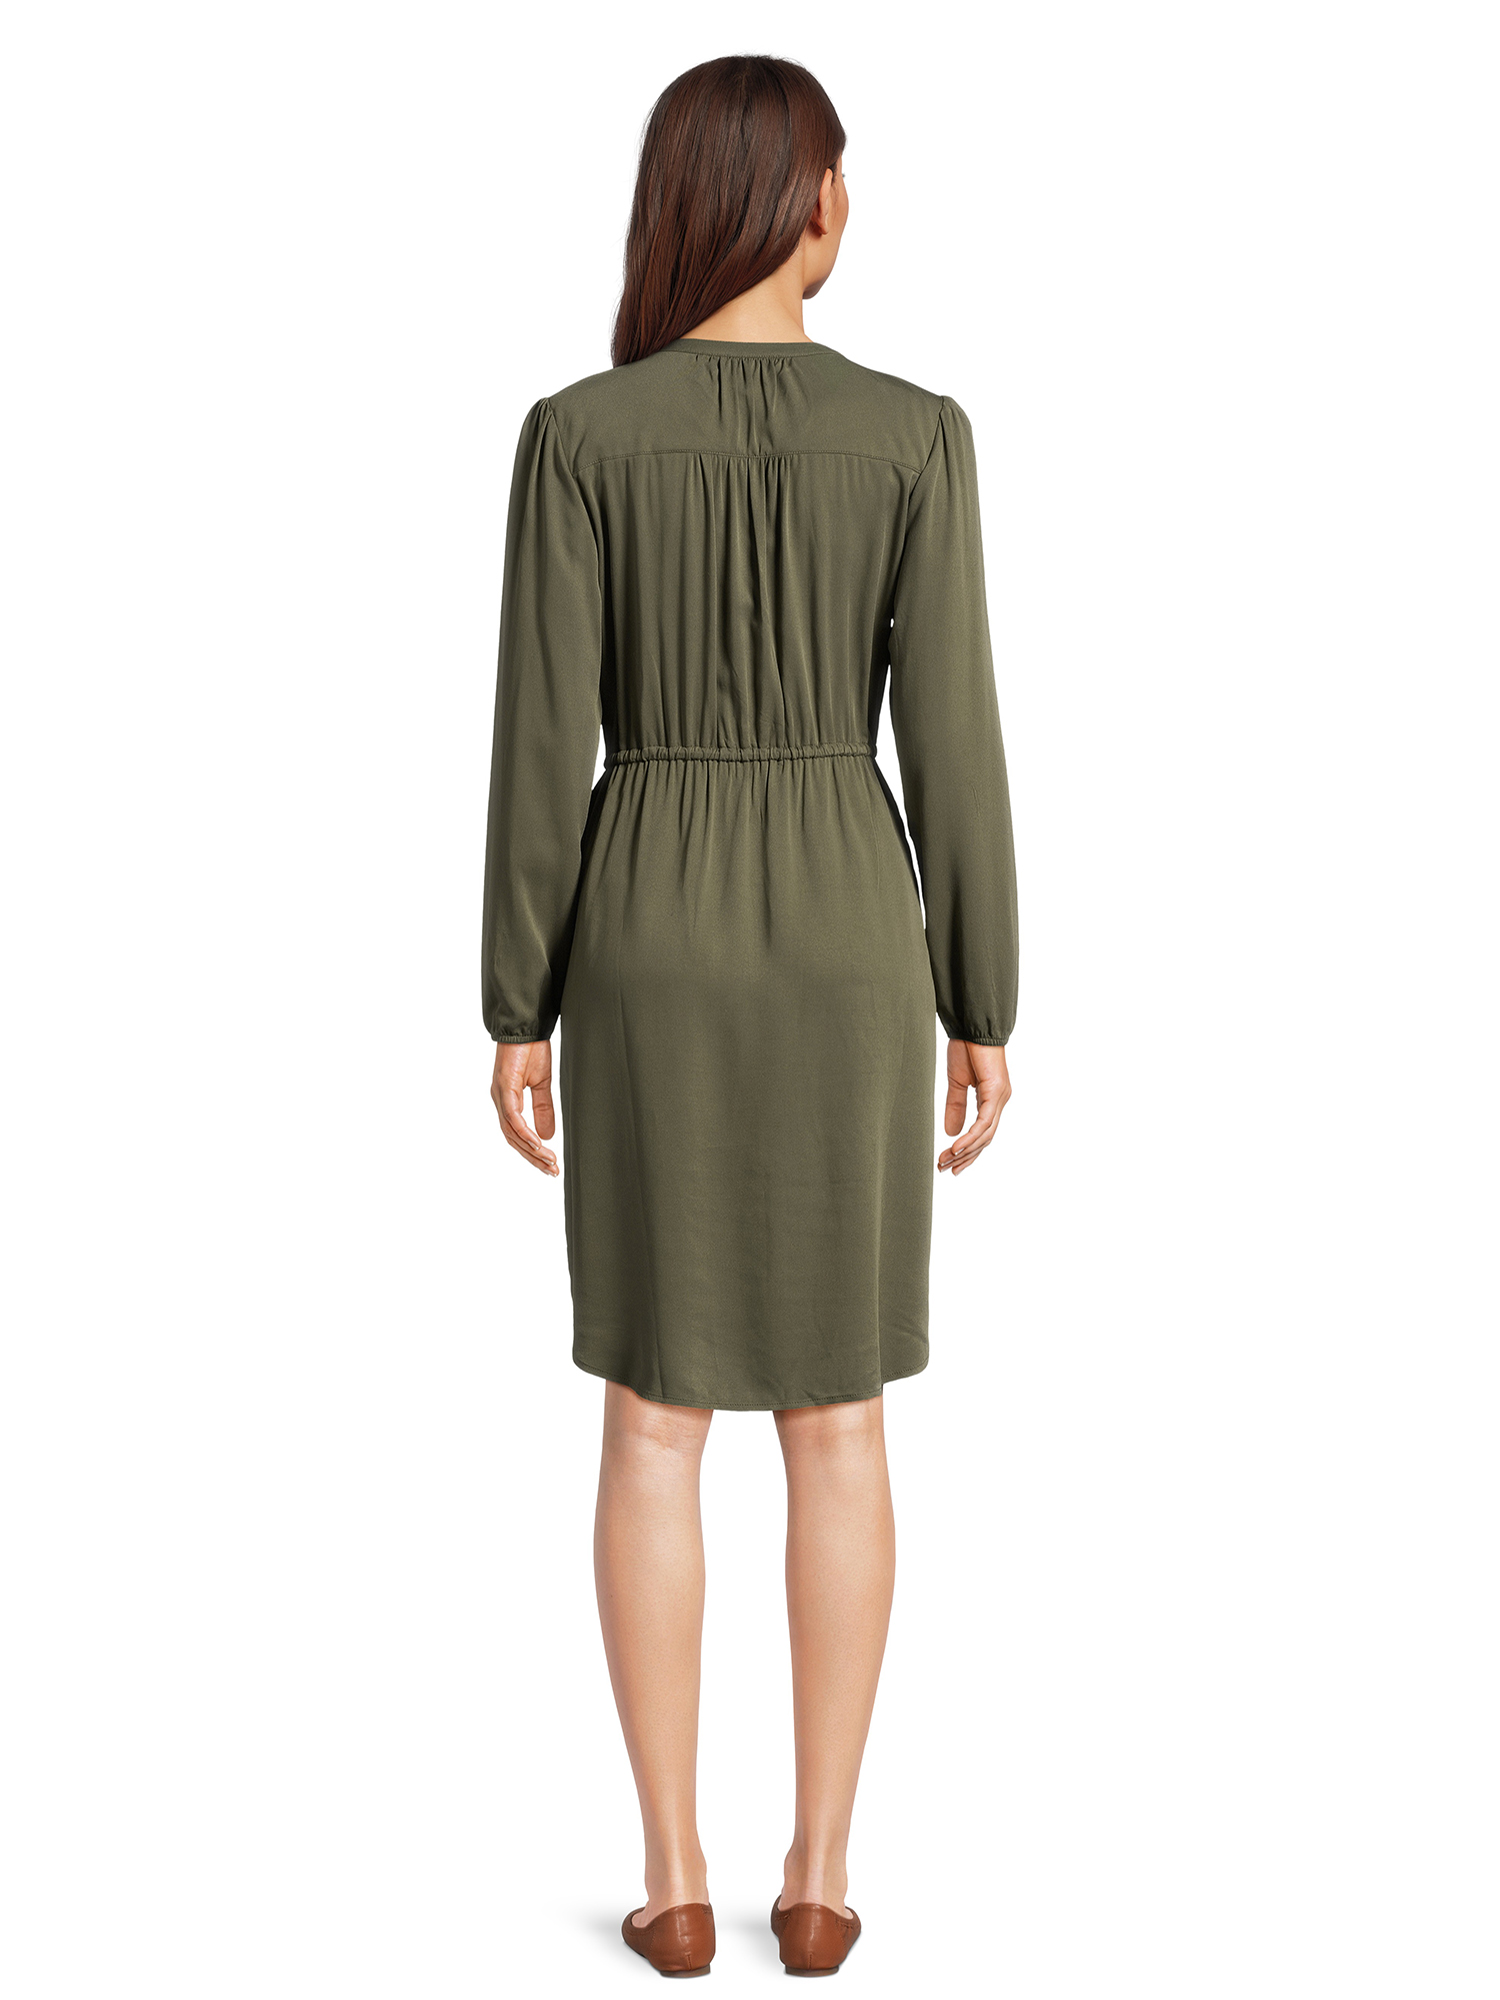 Time and Tru Women's Button Front Drawstring Waist Dress with Long Sleeves, Sizes XS-3XL - image 3 of 5